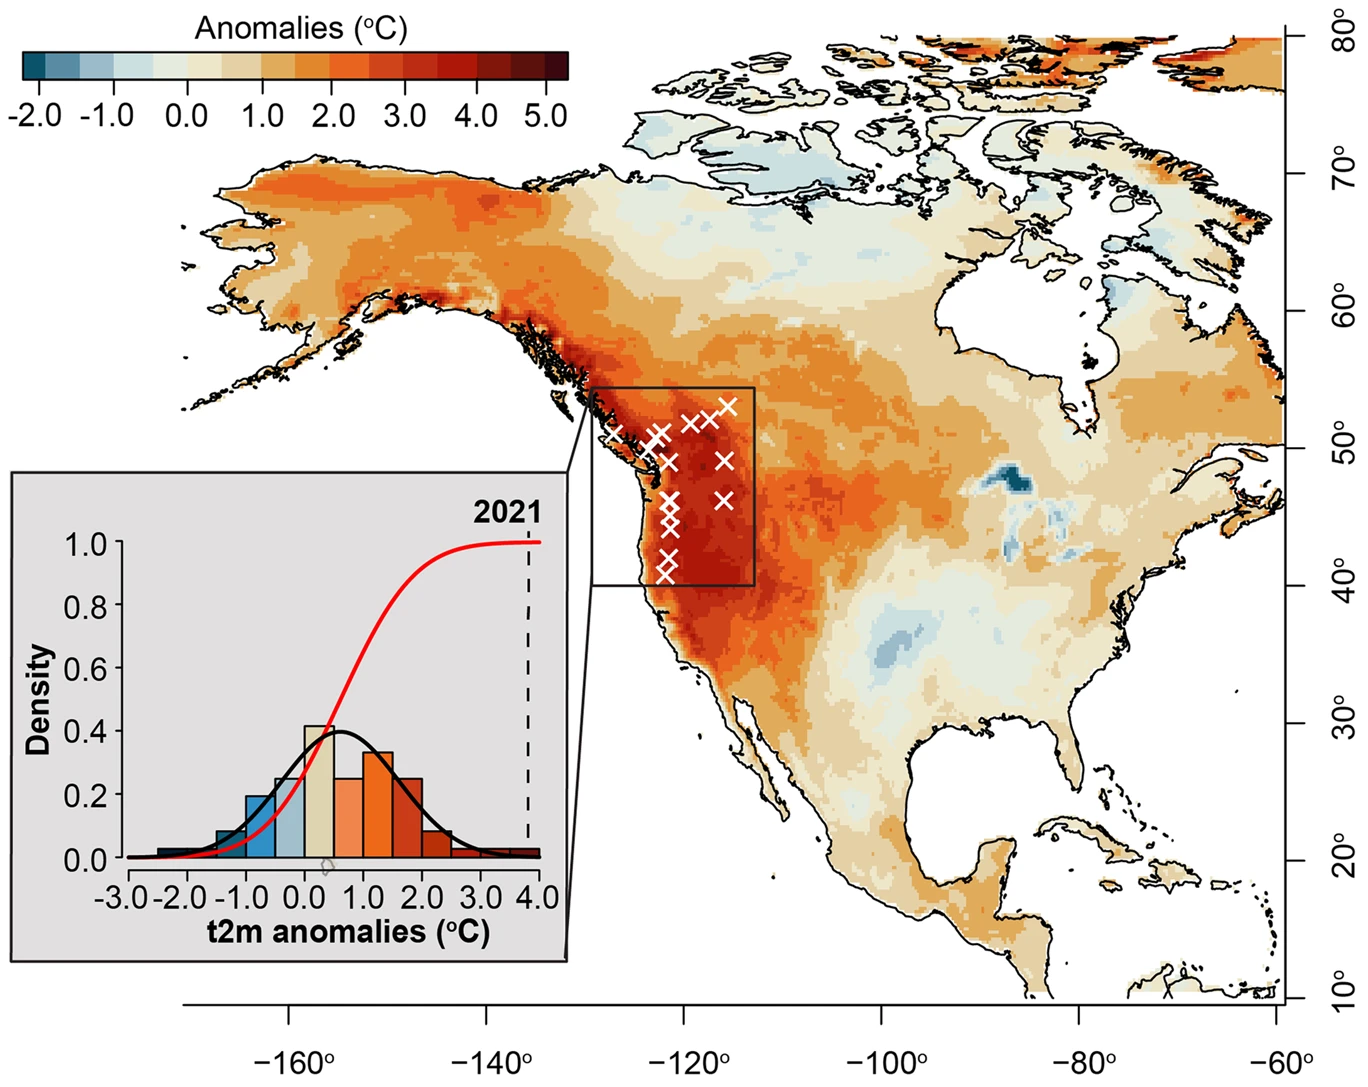 Map showing the physical imprint and consequences of extreme summer heat across the Pacific Northwest in 2021. The June-August (JJA) 2021 seasonally averaged temperature anomalies (t2m) over North America calculated from the 1951-1980 mean of ERA5 Reanalysis, with the Pacific Northwest region (PNW; 42–53 °N, 124–115 °W, dark blue box) highlighted. The year 2021 (dashed black line) is shown relative to the distribution (black line) and probability density (red line) curves of JJA t2m values over the period 1950–2021 for the PNW region. White exes indicate the locations of all tree-ring chronology predictors used in the subsequent JJA t2m reconstruction. Graphic: Heeter, et al., 2023 / npj Climate and Atmospheric Science